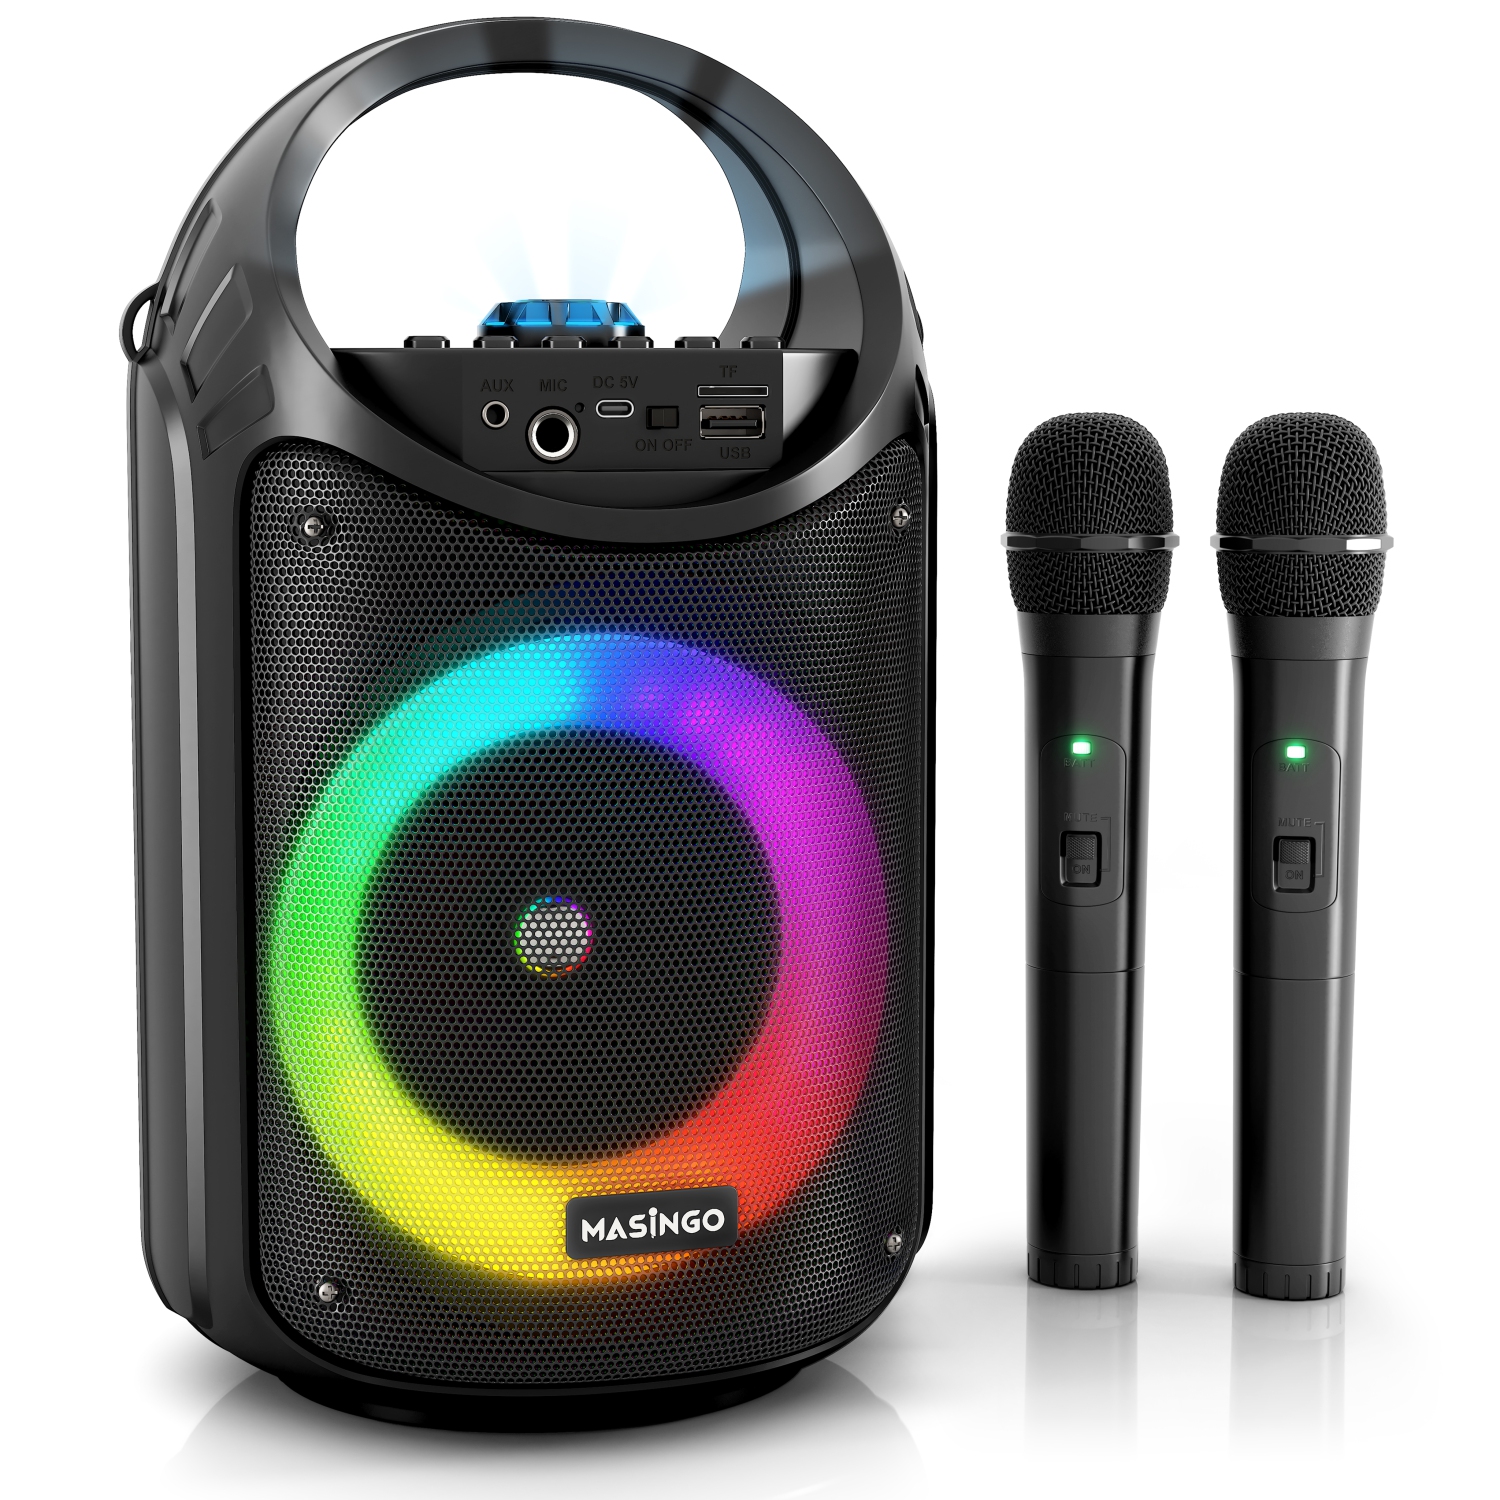 Karaoke Machine for Kids and Adults with 2 Wireless Microphones, PA Speaker System with Colorful LED Lights, Supports TF Card/USB, AUX/MIC in, TWS for Home Party, Burletta C10